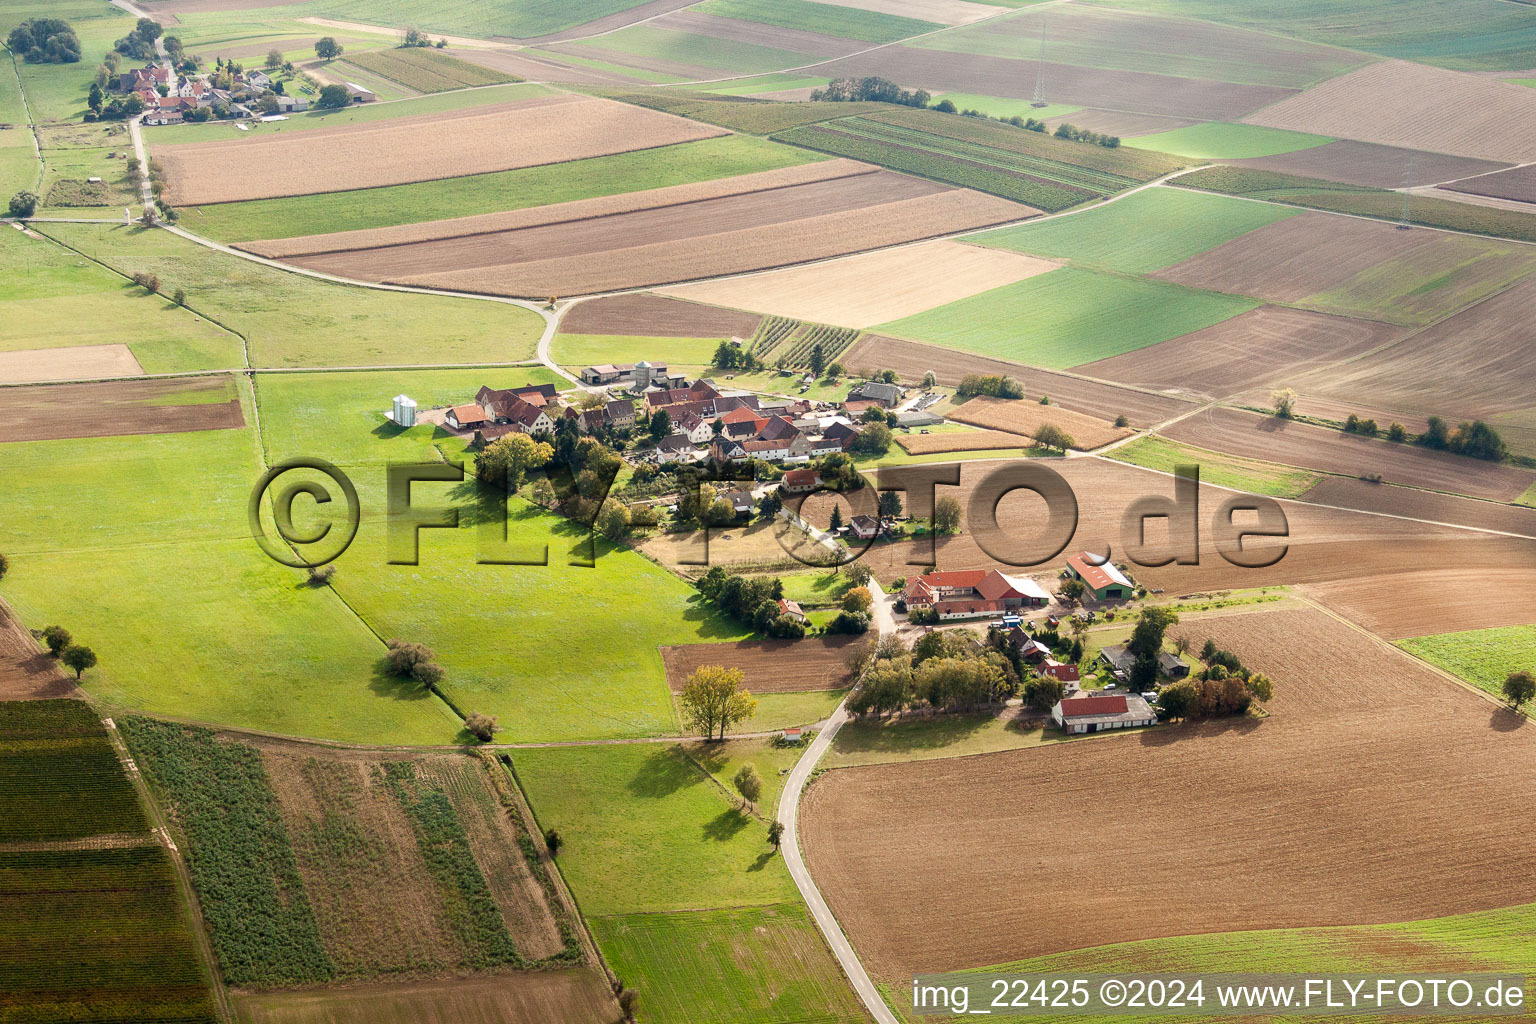 Farm on the edge of cultivated fields in the district Deutschhof in Kapellen-Drusweiler in the state Rhineland-Palatinate, Germany